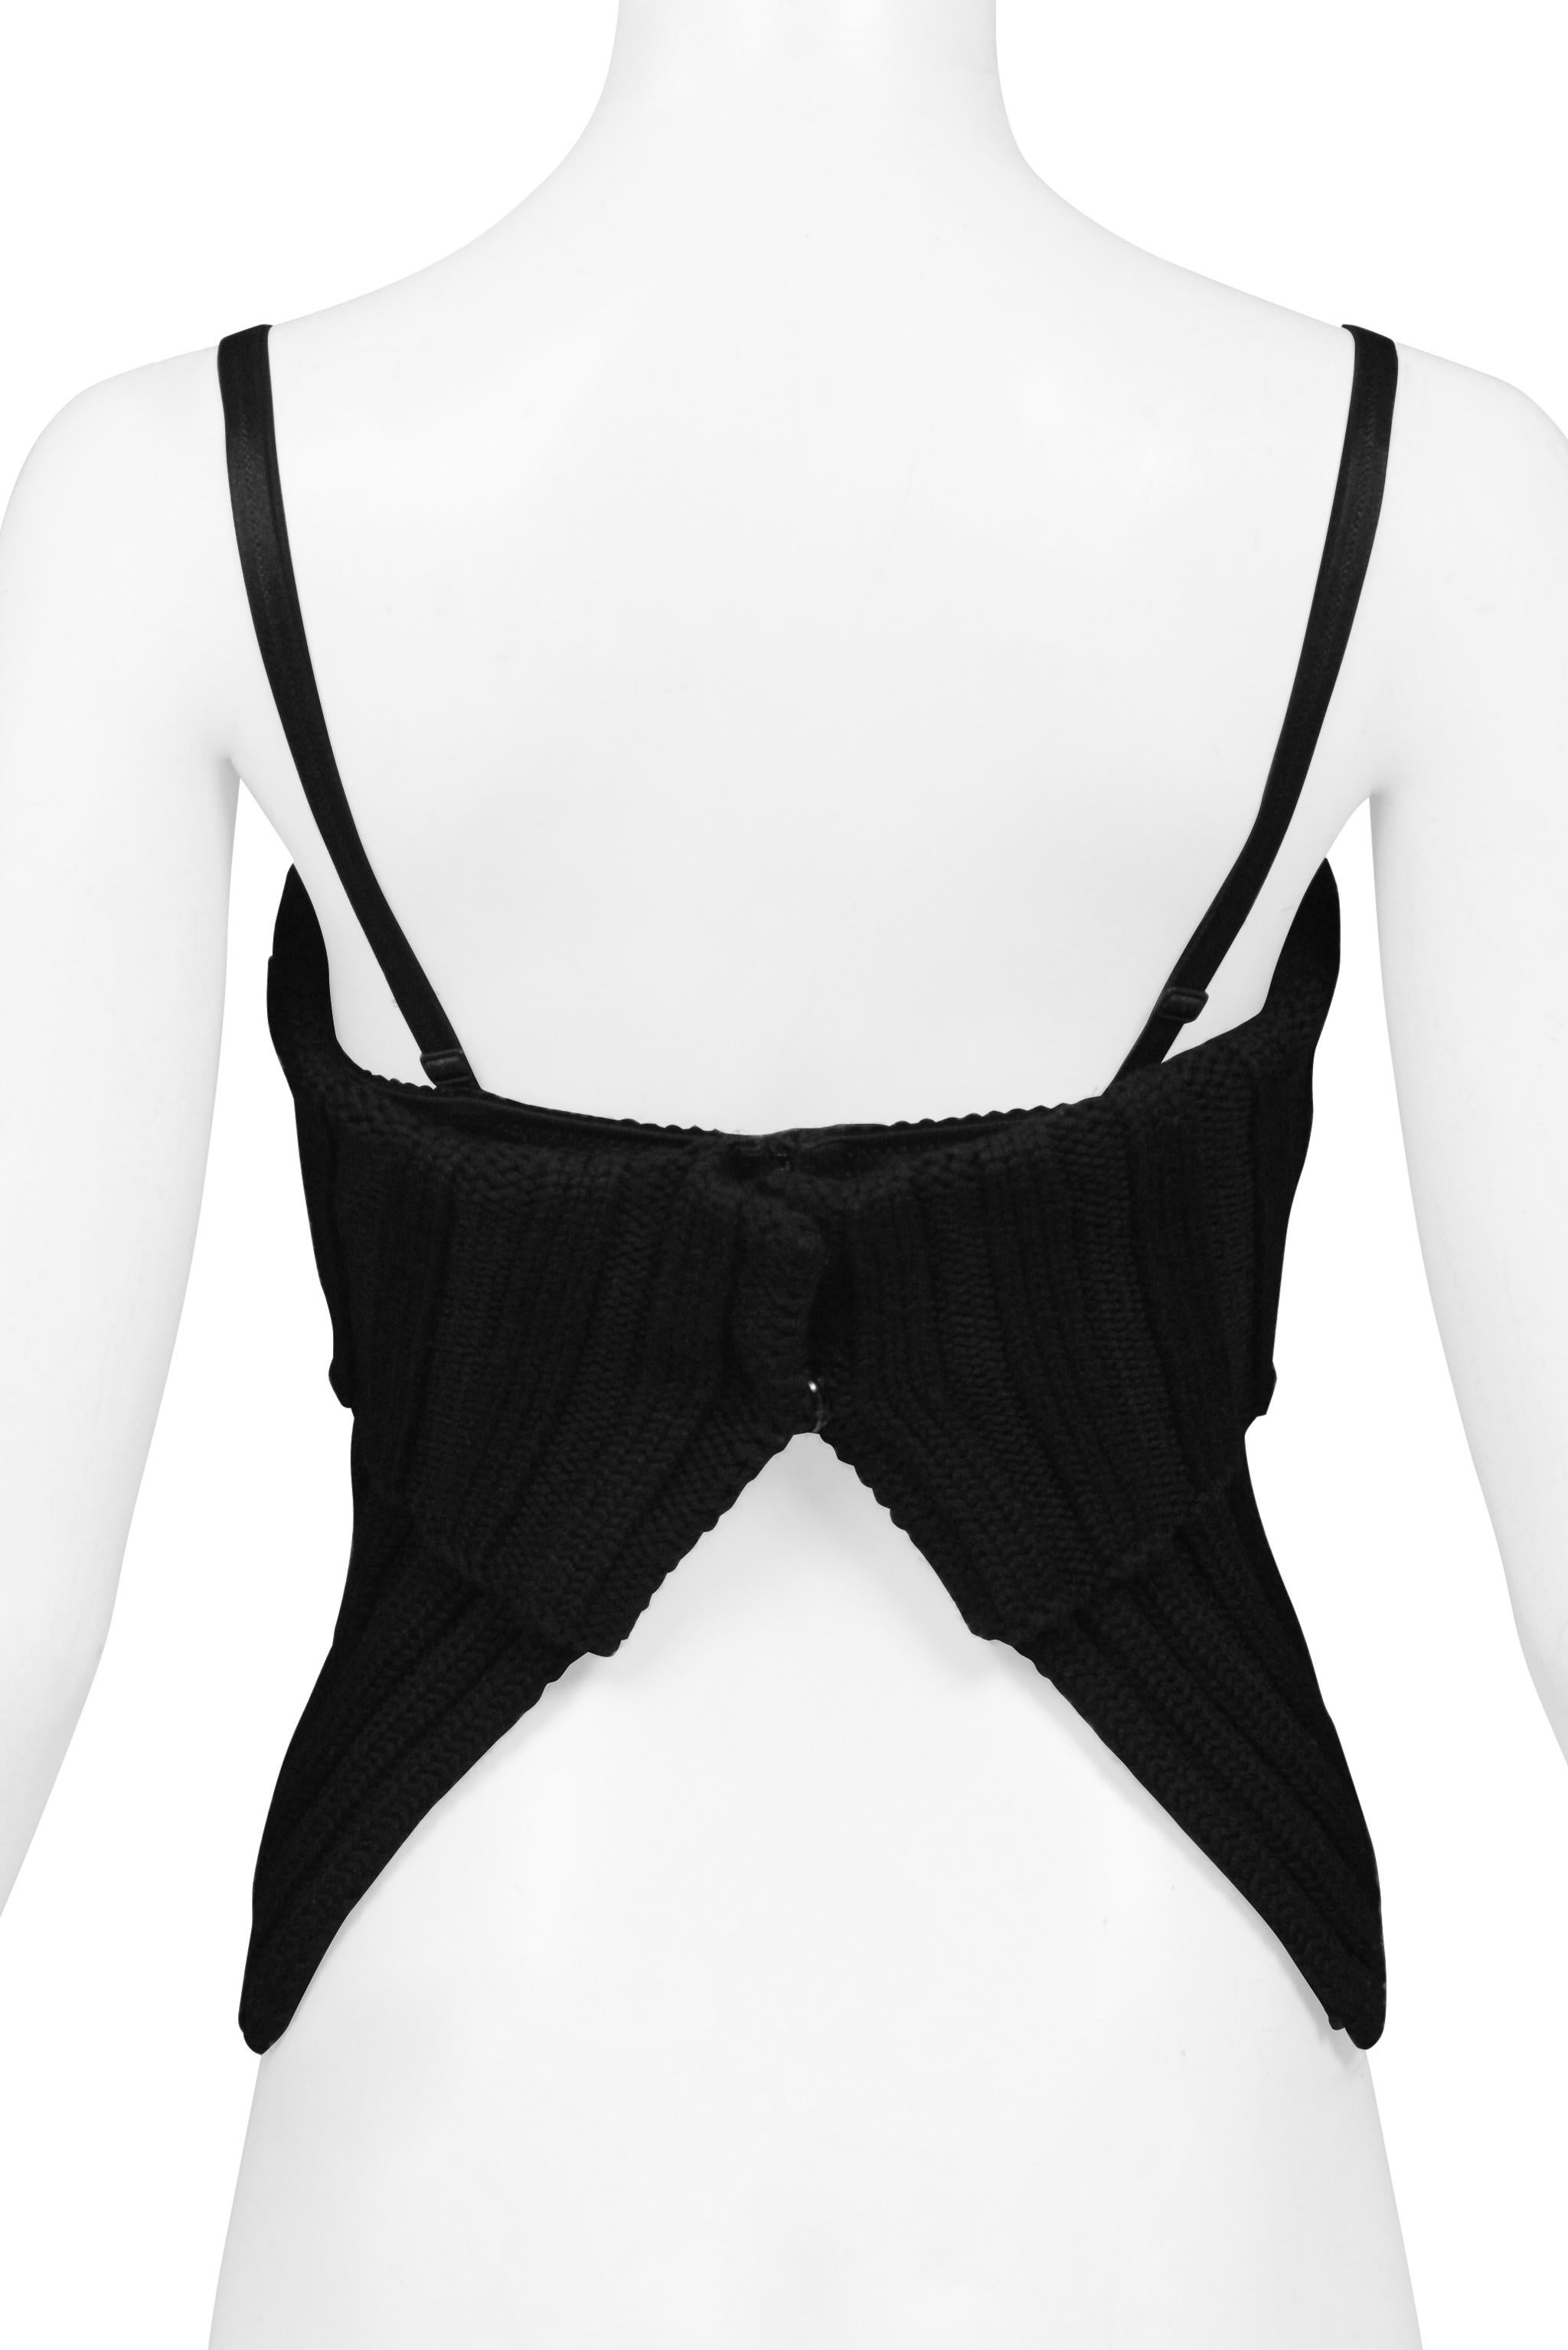 Dolce & Gabbana Black Knit Corset Top With Attached Bra 1999 2